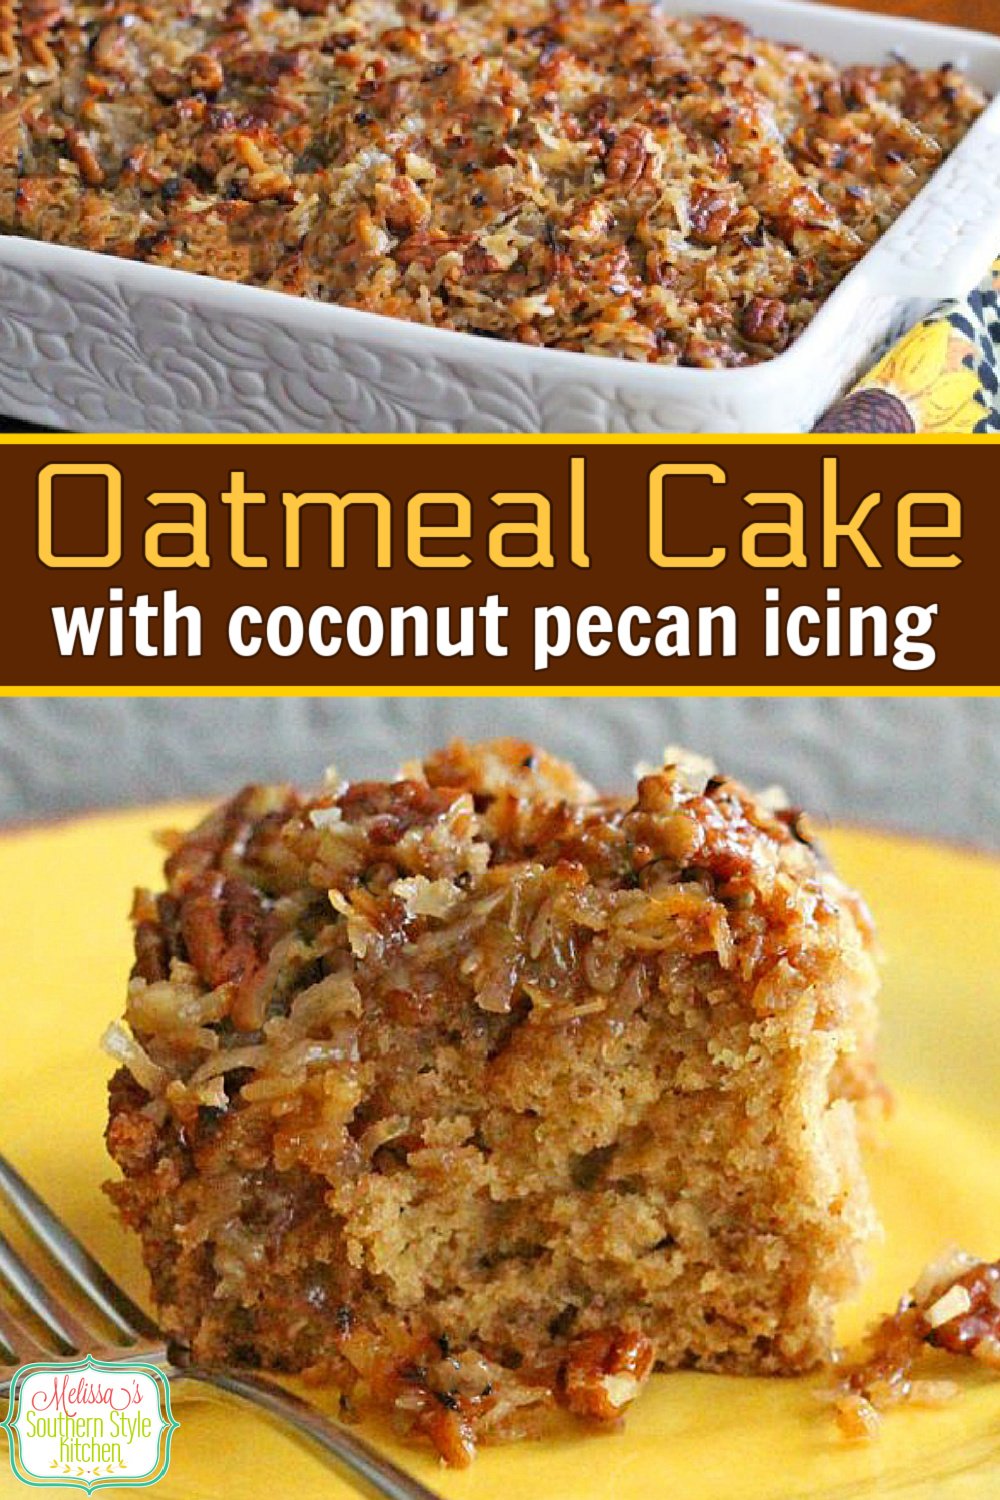 This vintage Oatmeal Cake with Broiled Coconut Pecan Topping is unbelievably rich and delicious! #oatmealcake #cakerecipes #coconutpecanfrosting #oldfashionedoatmealcake #desserts #dessertfoodrecipes #southernrecipes #southernfood #holidaybaking #holidaycakes #birthdaycake via @melissasssk